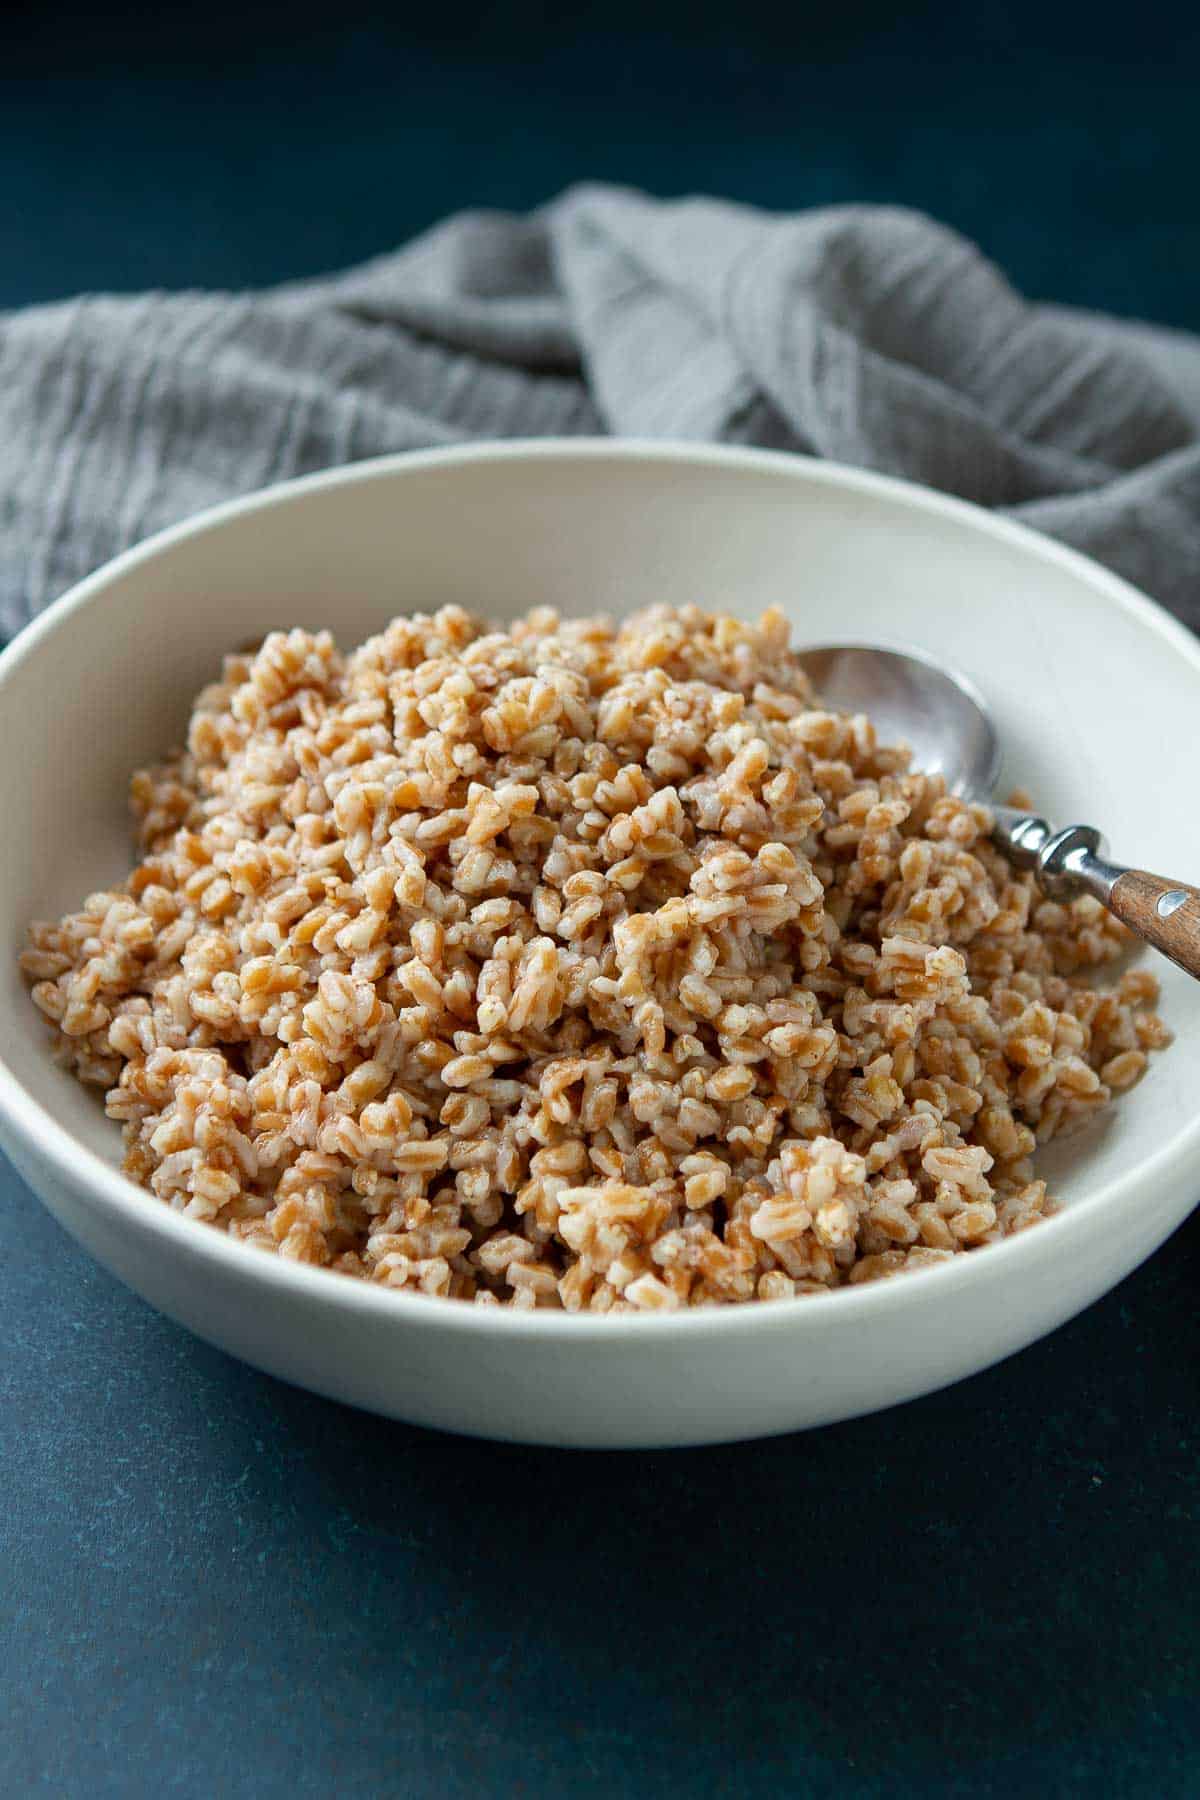 Cooked Instant Pot farro in a white bowl, with gray napkin on the side.